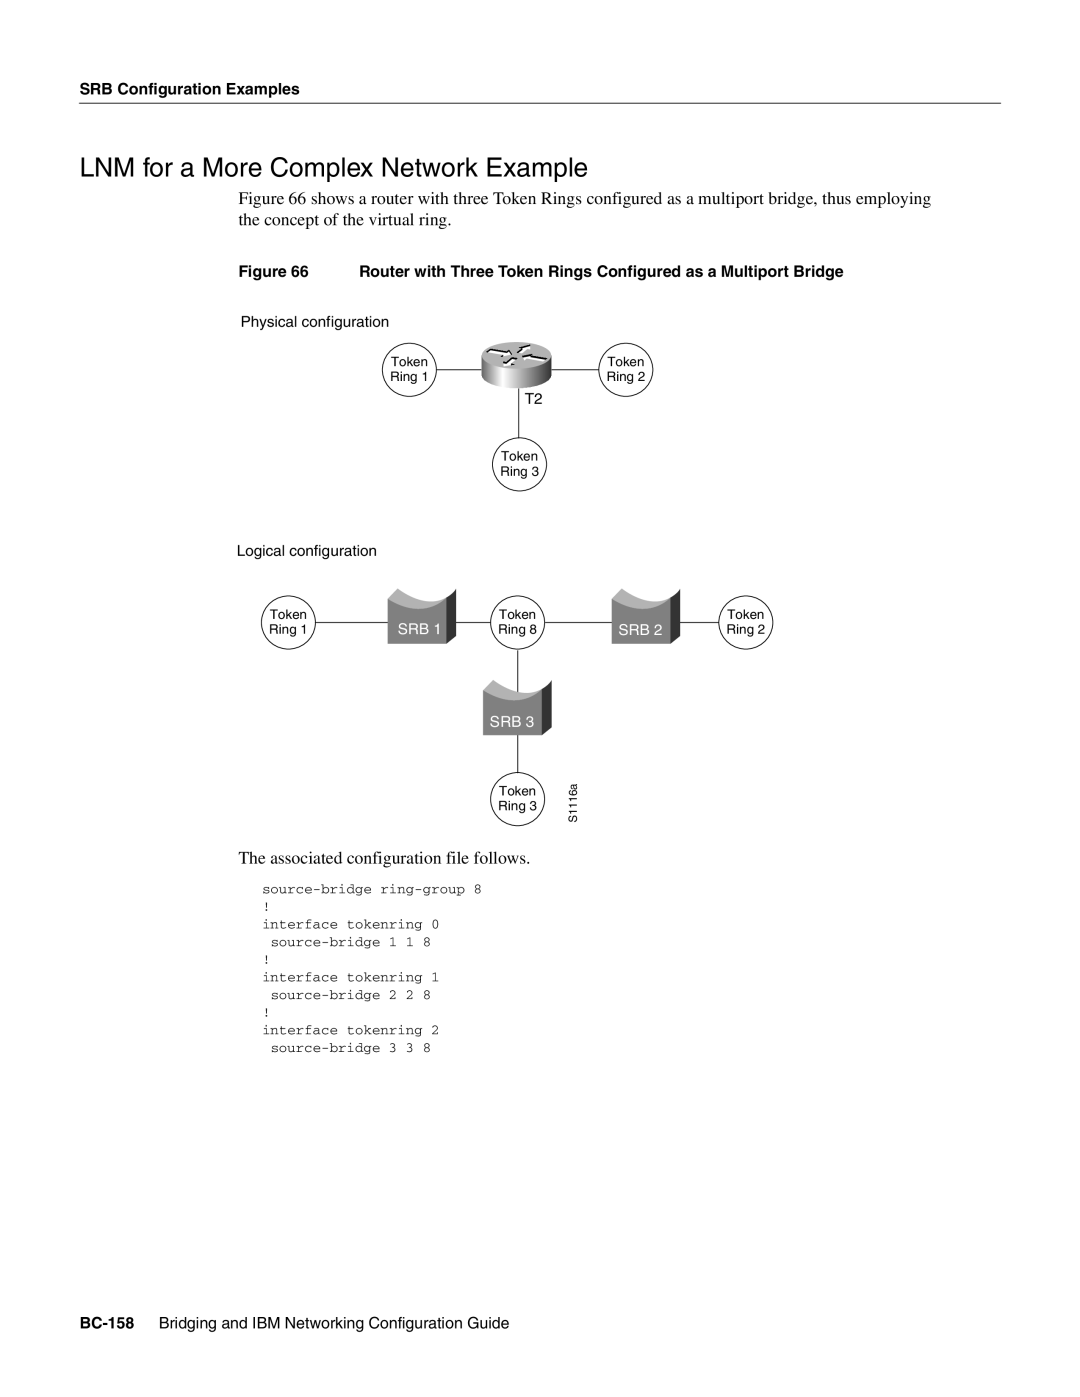 Cisco Systems BC-109 LNM for a More Complex Network Example, SRB Configuration Examples, Physical configuration, Token 